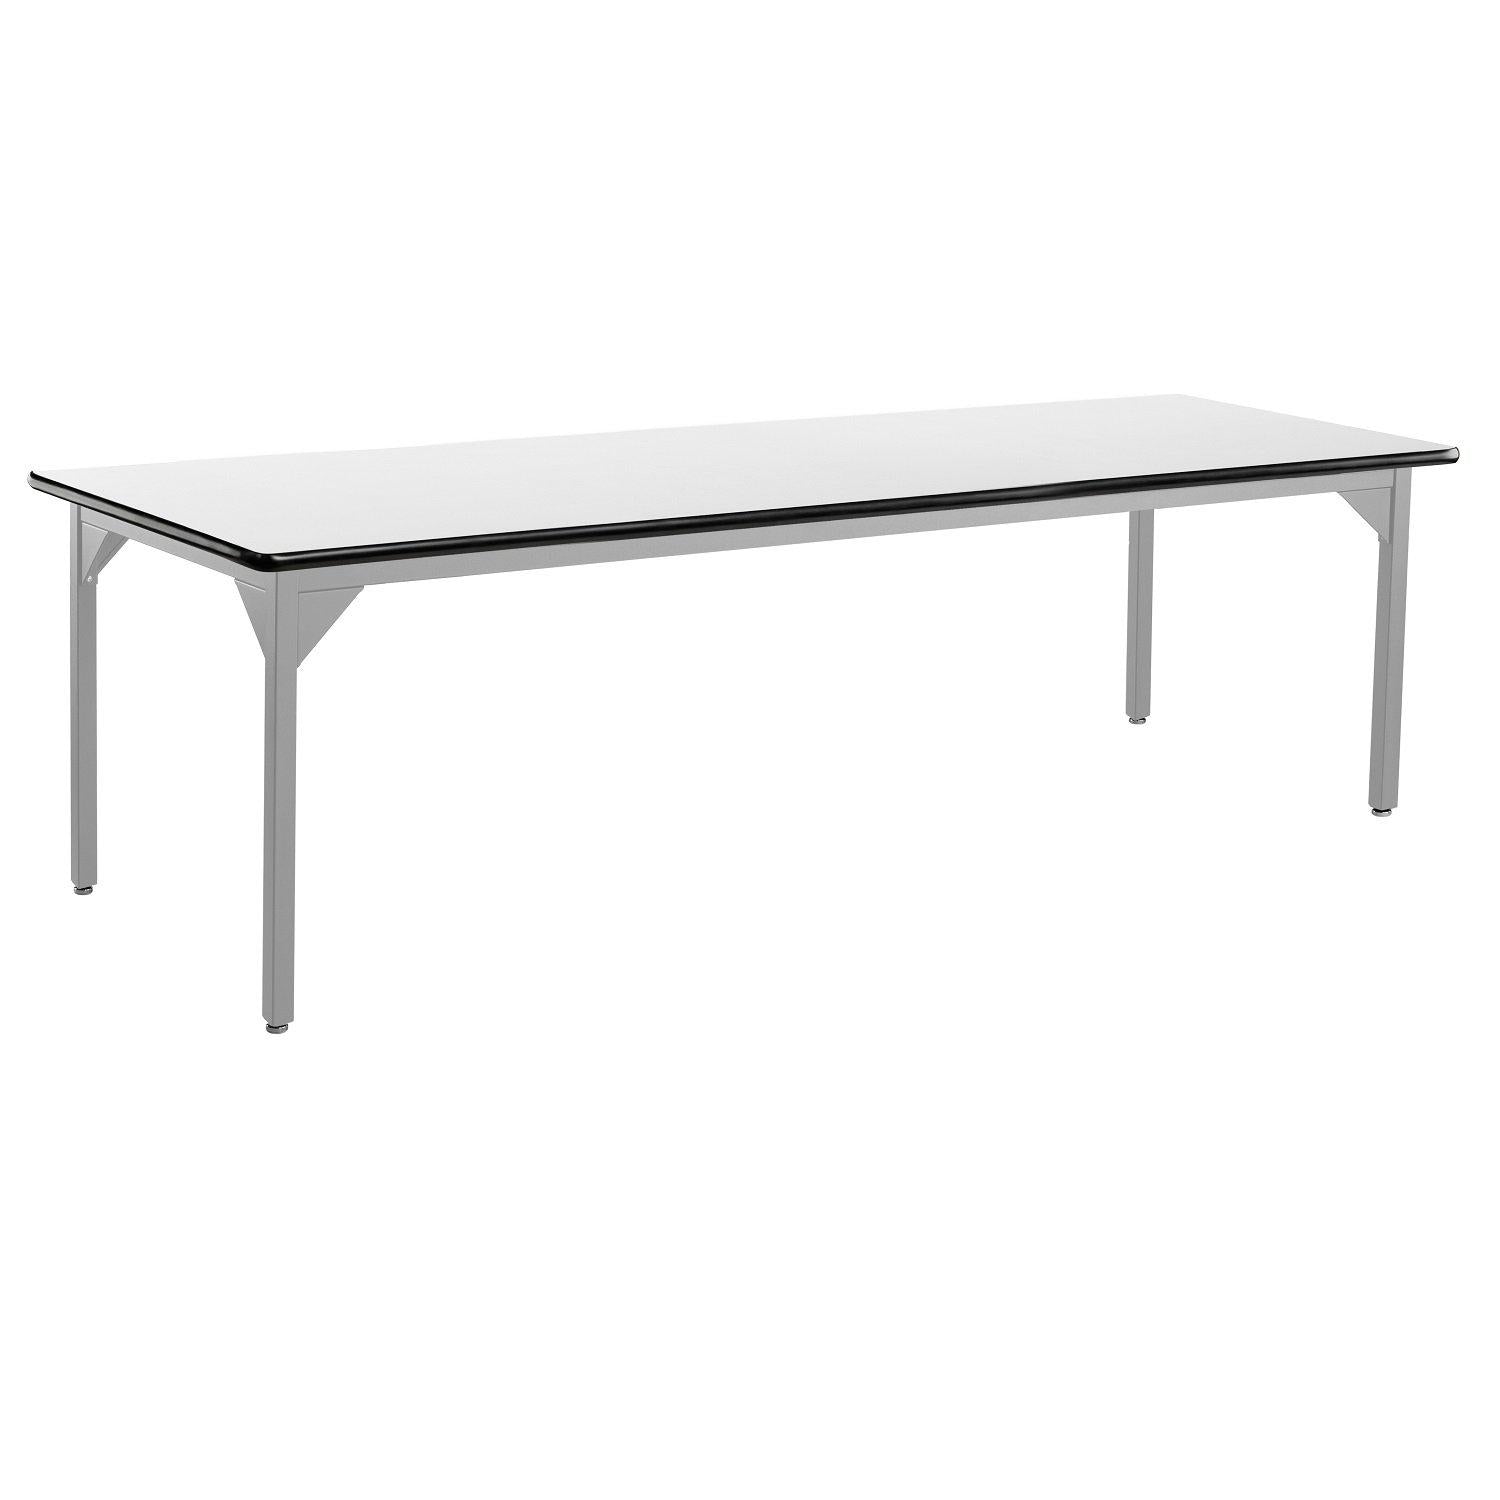 Heavy-Duty Fixed Height Utility Table, Soft Grey Frame, 48" x 72", Whiteboard High-Pressure Laminate Top